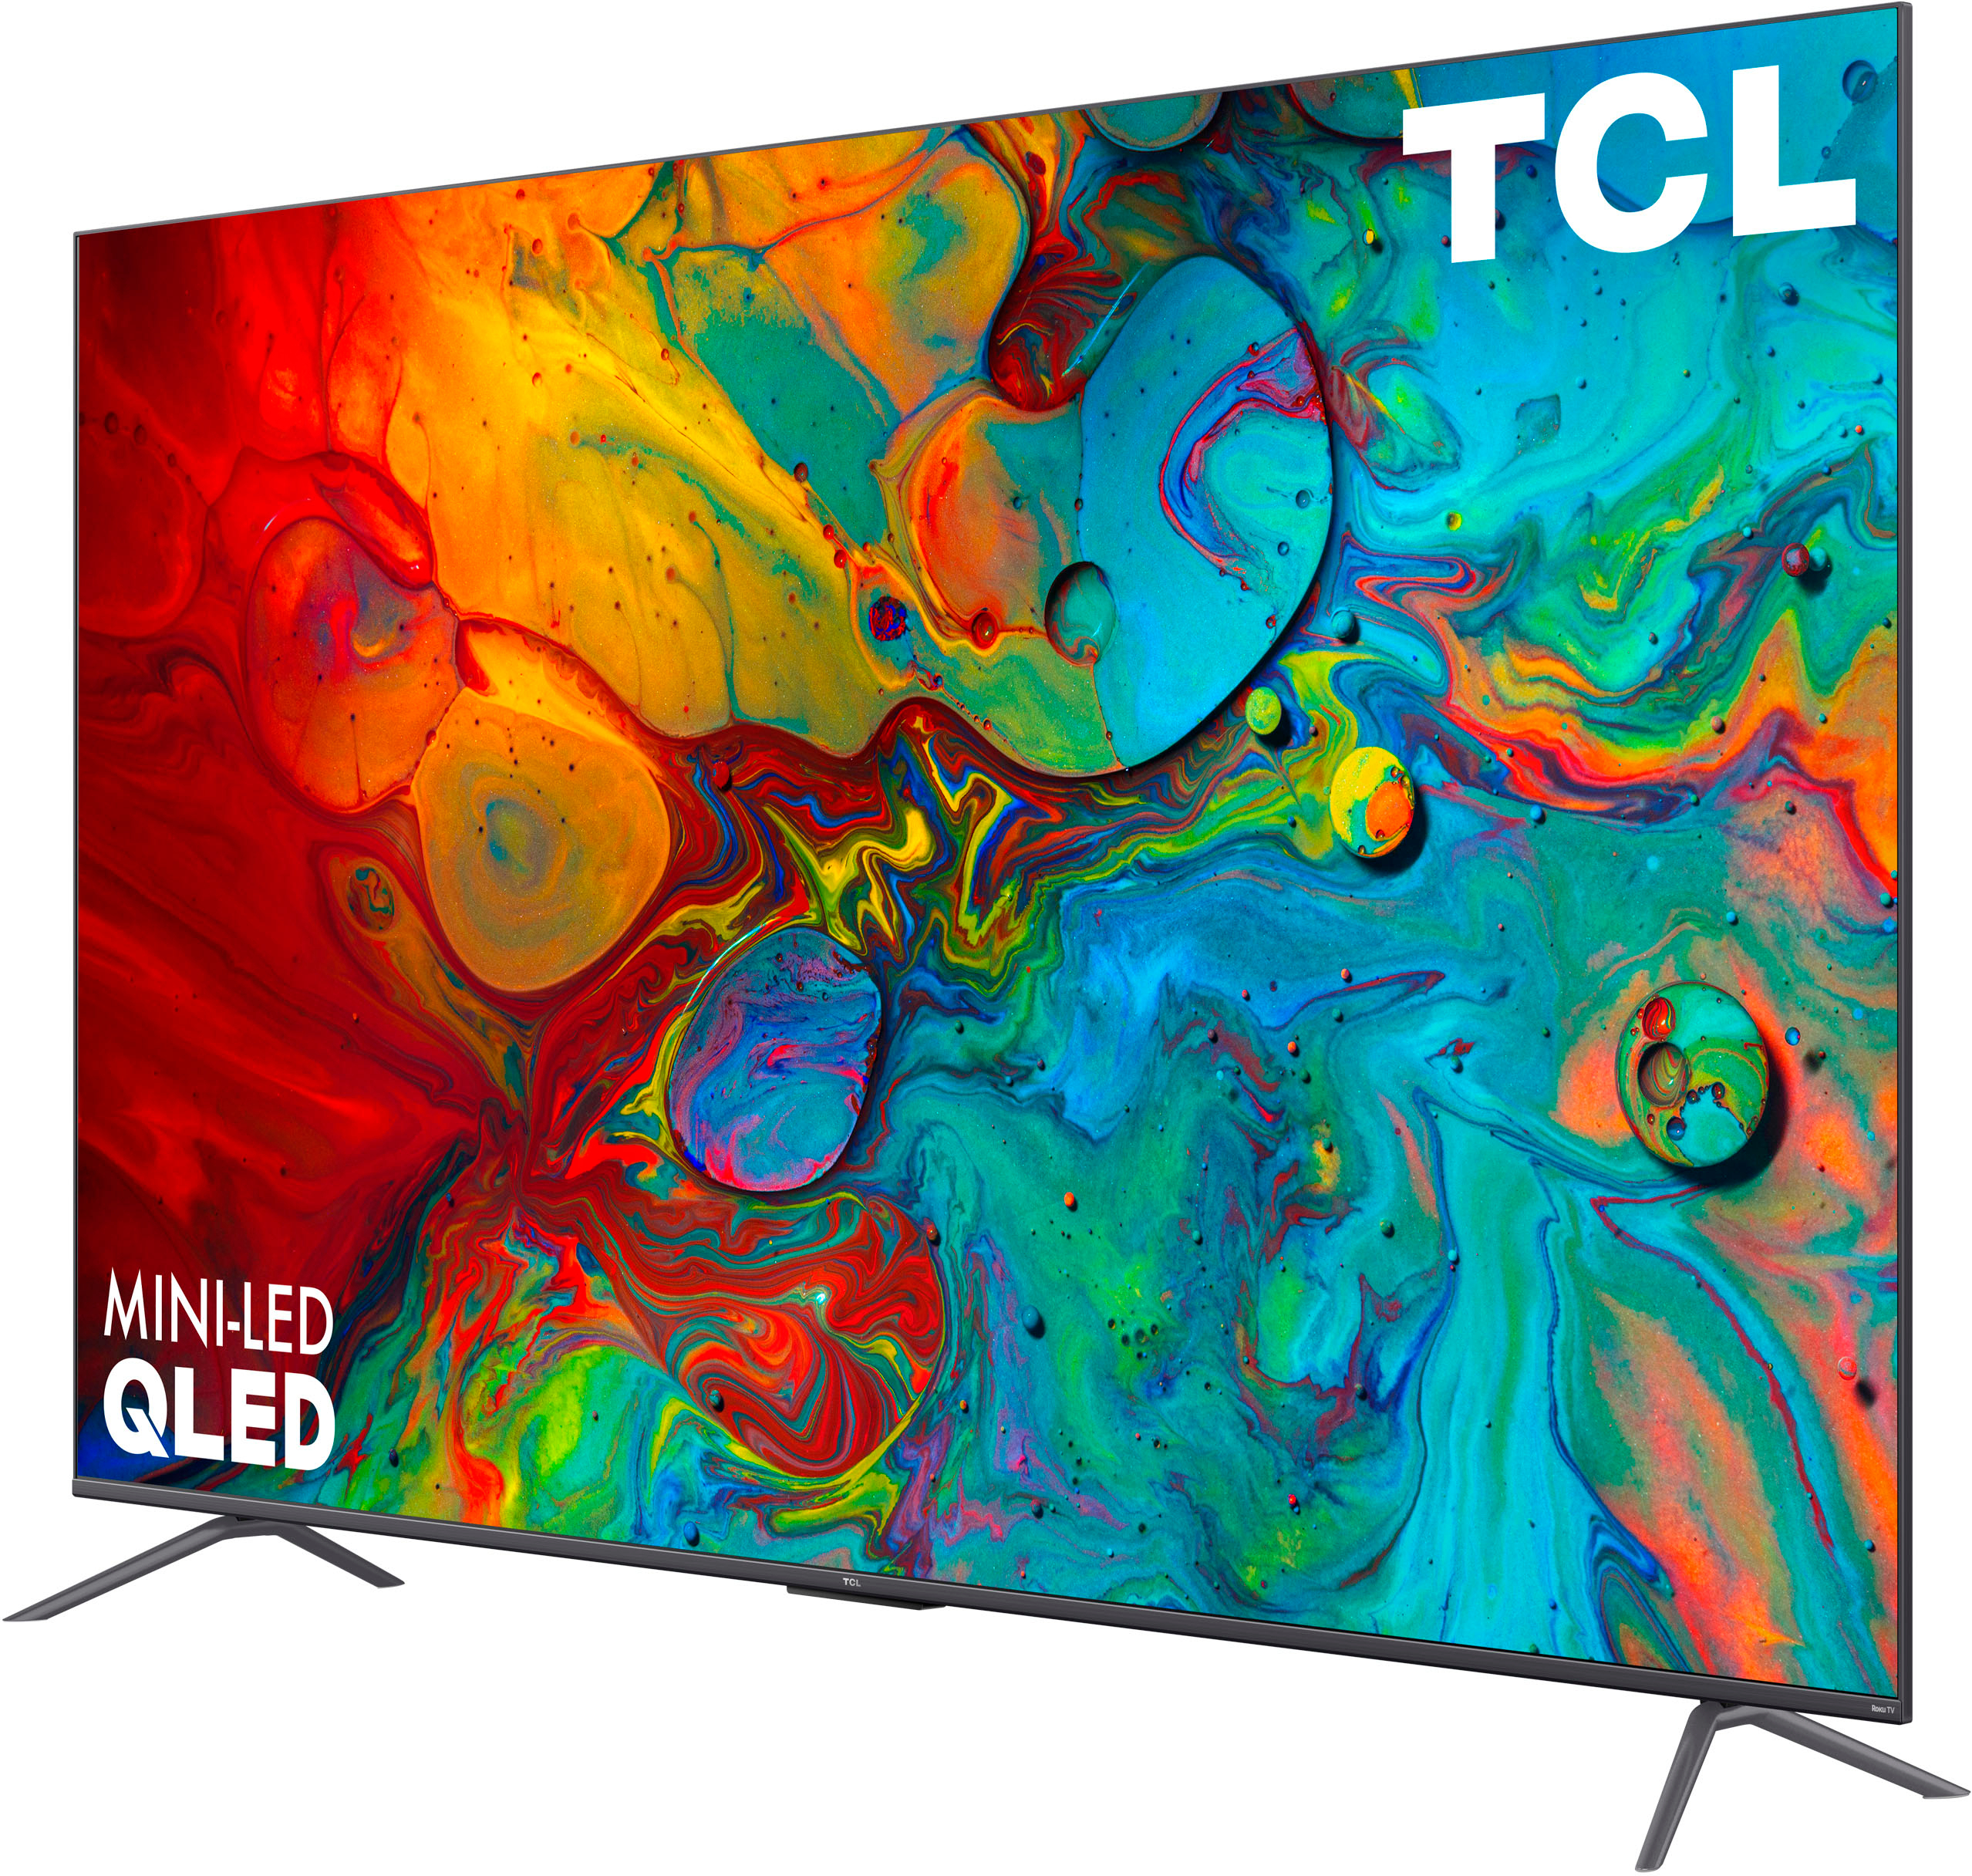 What do you think is the better option: TCL C845 vs Samsung QN90B? : r/4kTV